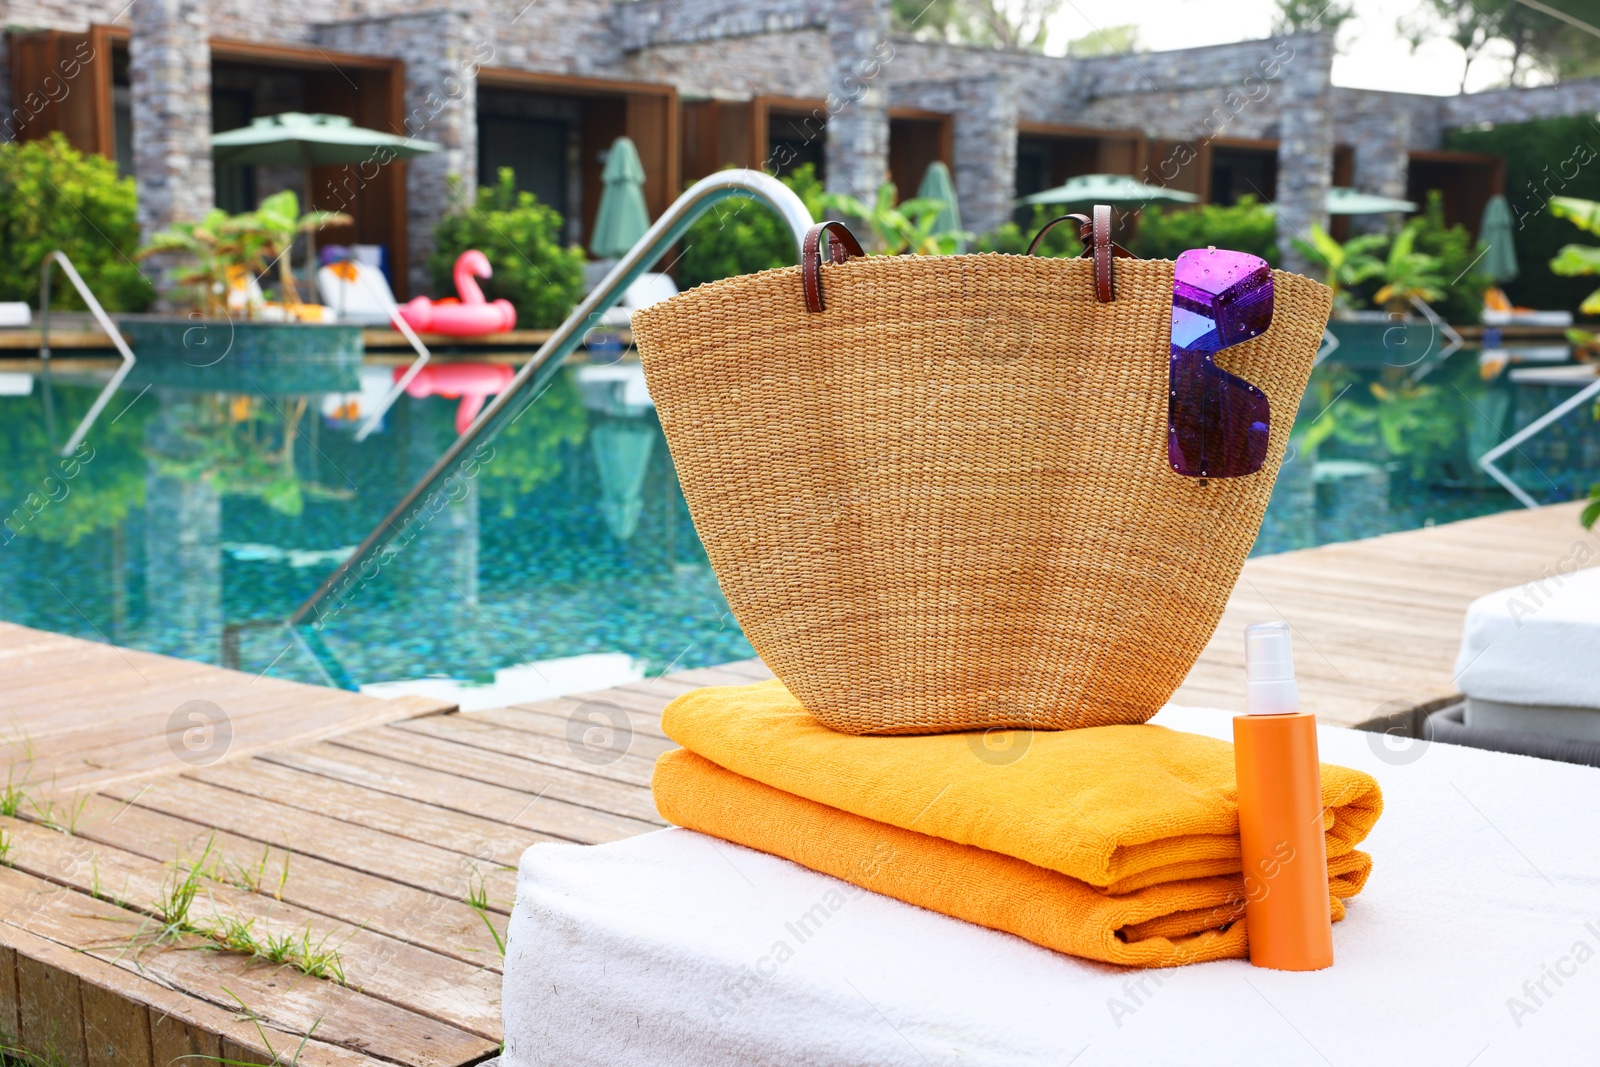 Photo of Wicker bag with beach accessories on sunbed near outdoor swimming pool. Luxury resort